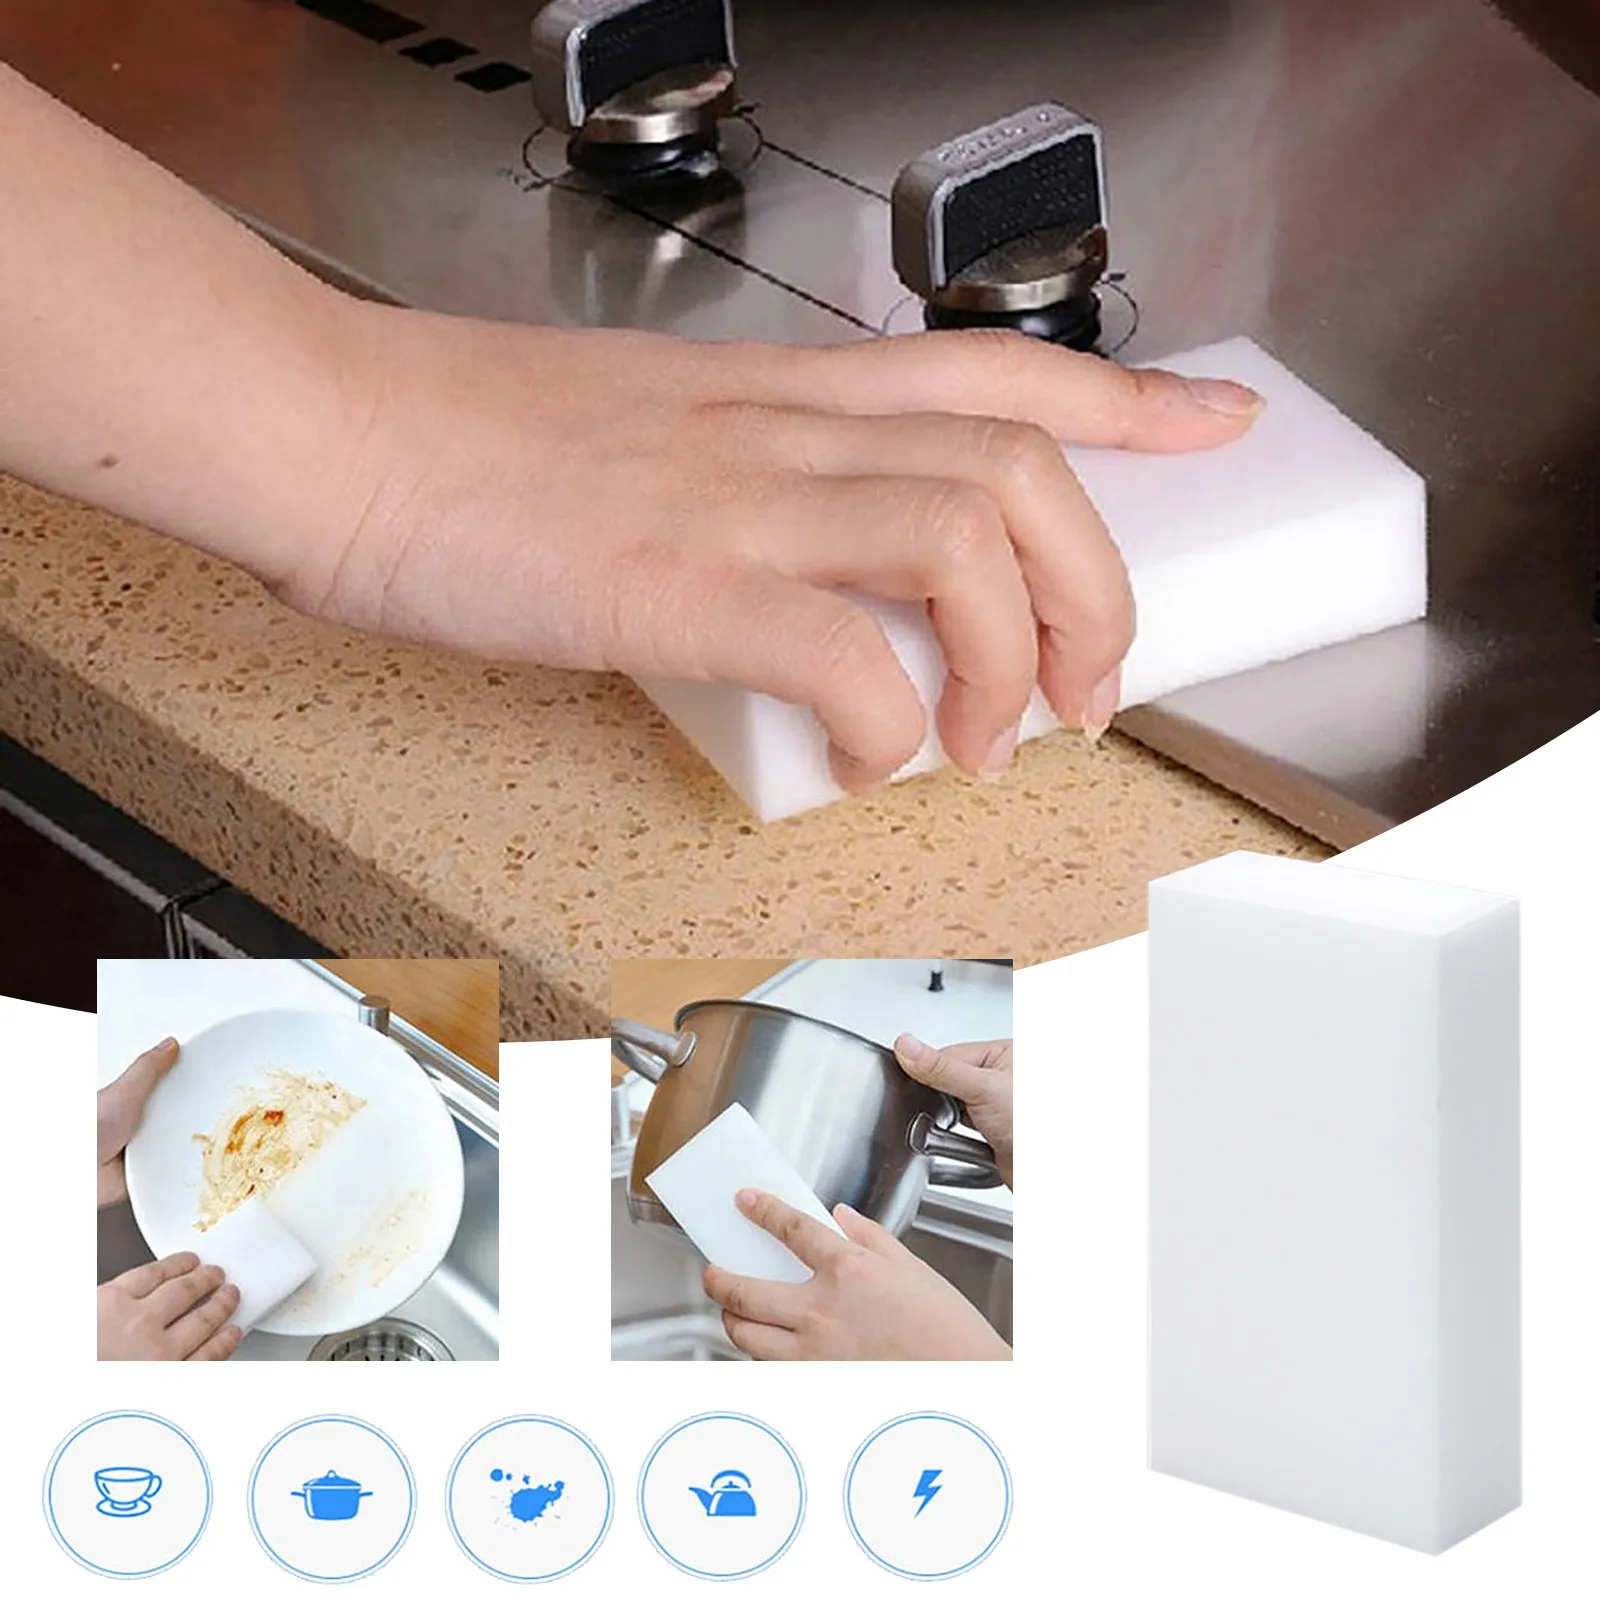 

Magic Wipe Car Wash Sponge Wipe Decontamination Nano Friction Cleaning to The Window to The Wall Clean Strong Carpet Cleaner